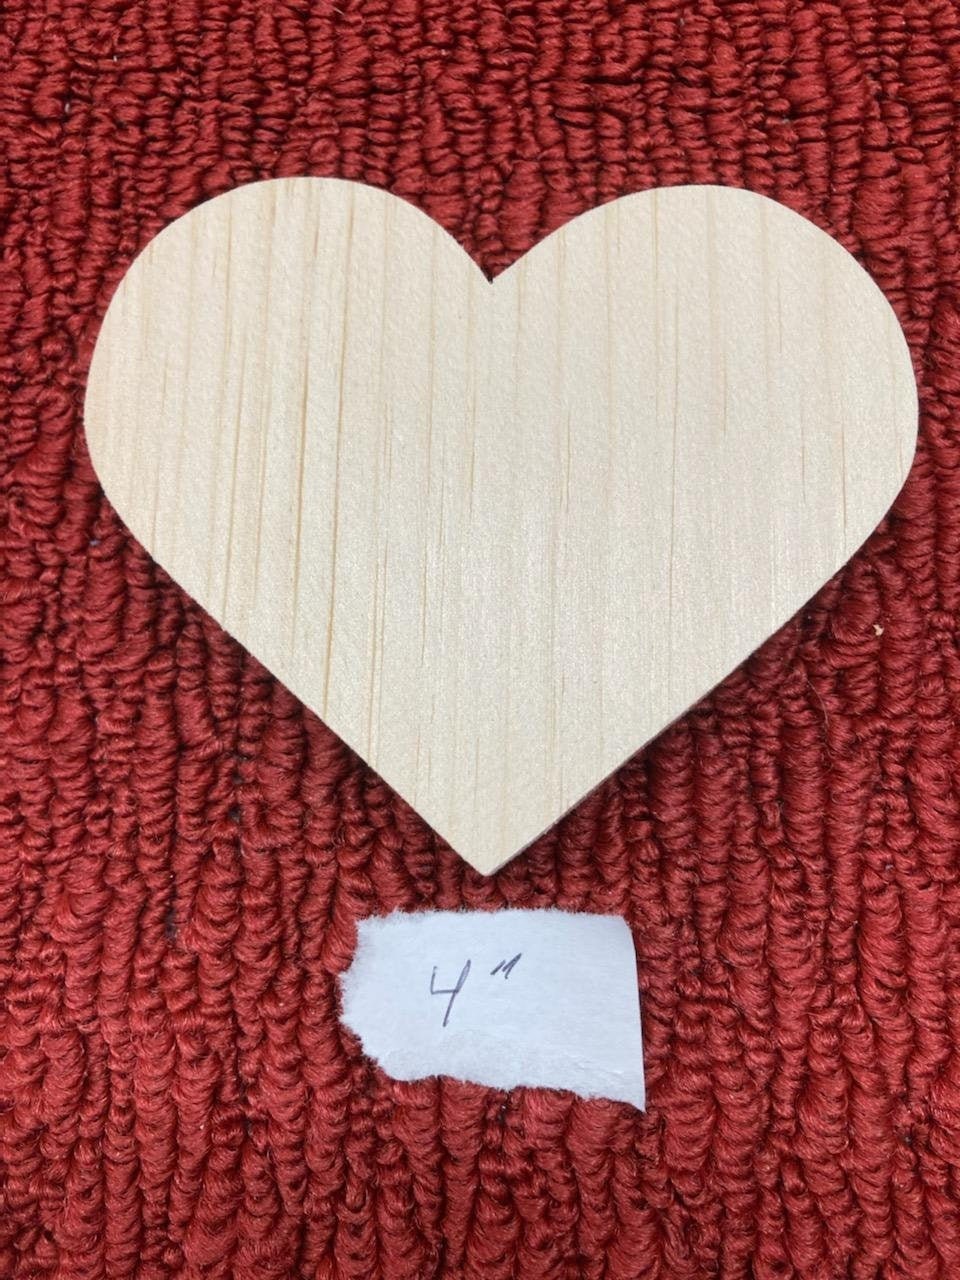 Small Wood Hearts 1-1/2 inch, 1/4 inch Thick, Pack of 250 Heart Shaped Wood  for Crafts/Rustic Bridal Shower Decorations, by Woodpeckers 